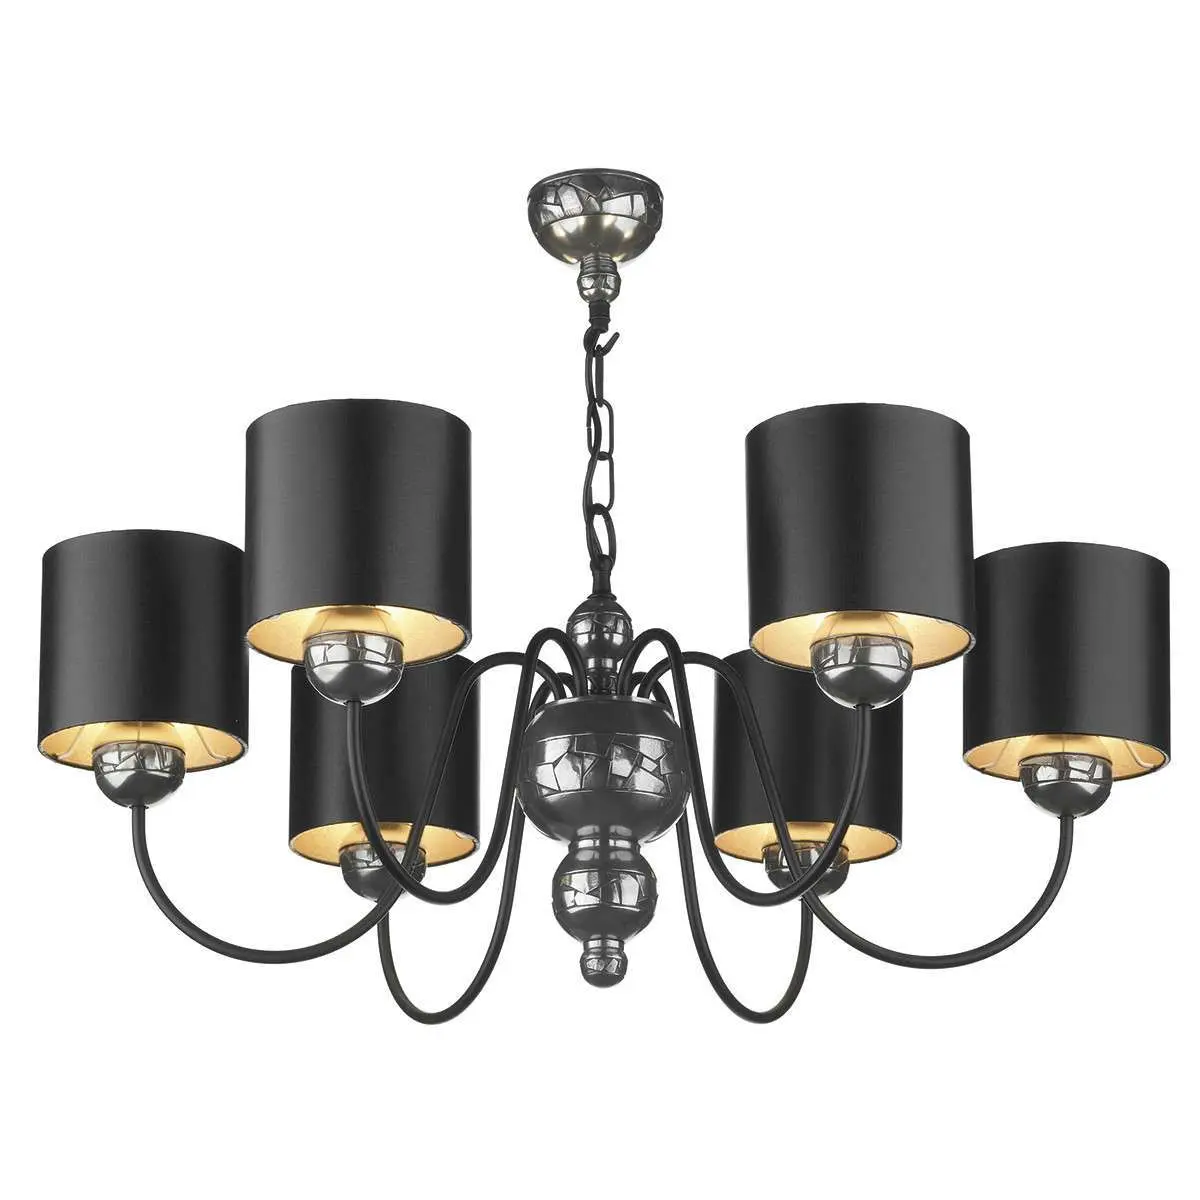 Garbo 6 Light Pendant Pewter complete with Black Silver Shades